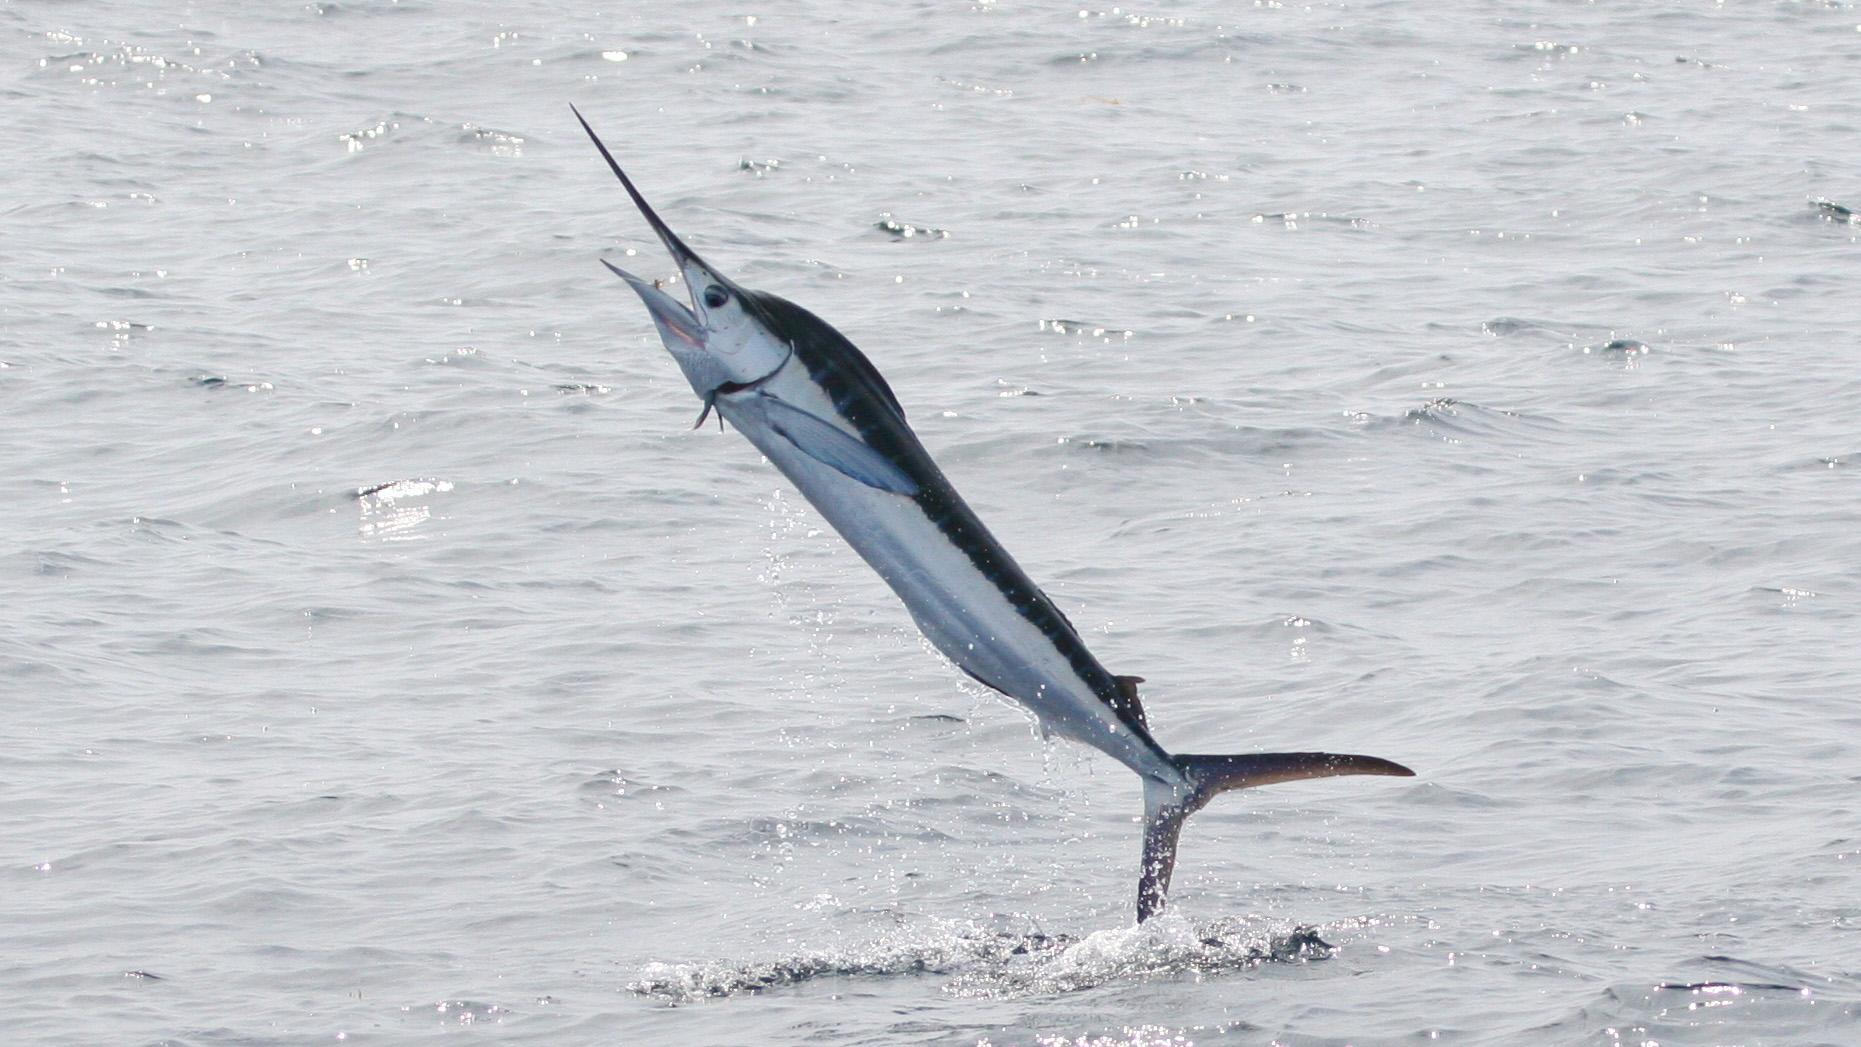 Populations of marlin and other big game fish in the waters between Florida and Cuba are under growing pressure from overfishing and habitat destruction.